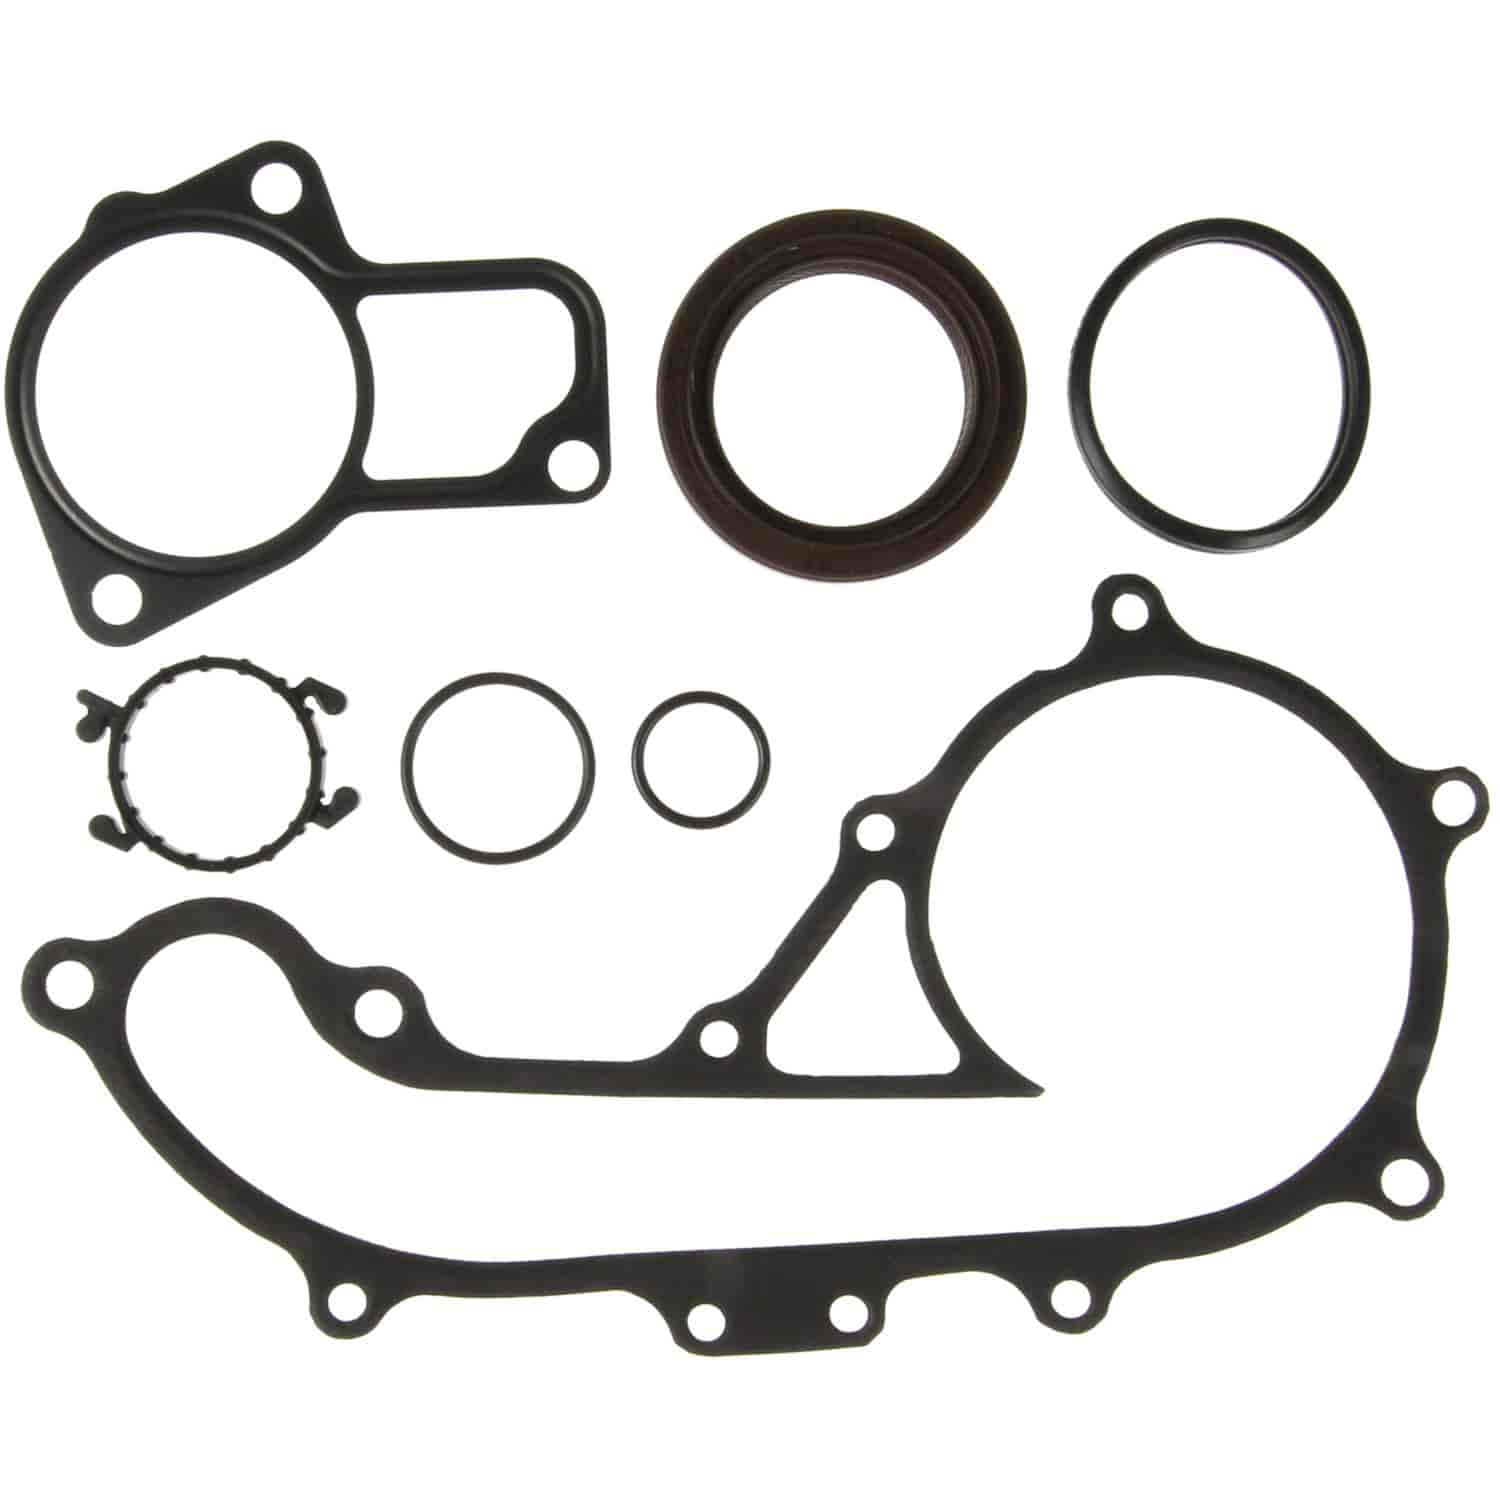 Timing Cover Gasket Set TOYOTA 2694cc 2.7L 2TRFE MFI GAS DOHC 4RUNNER 2010 TACOMA 2007-2013